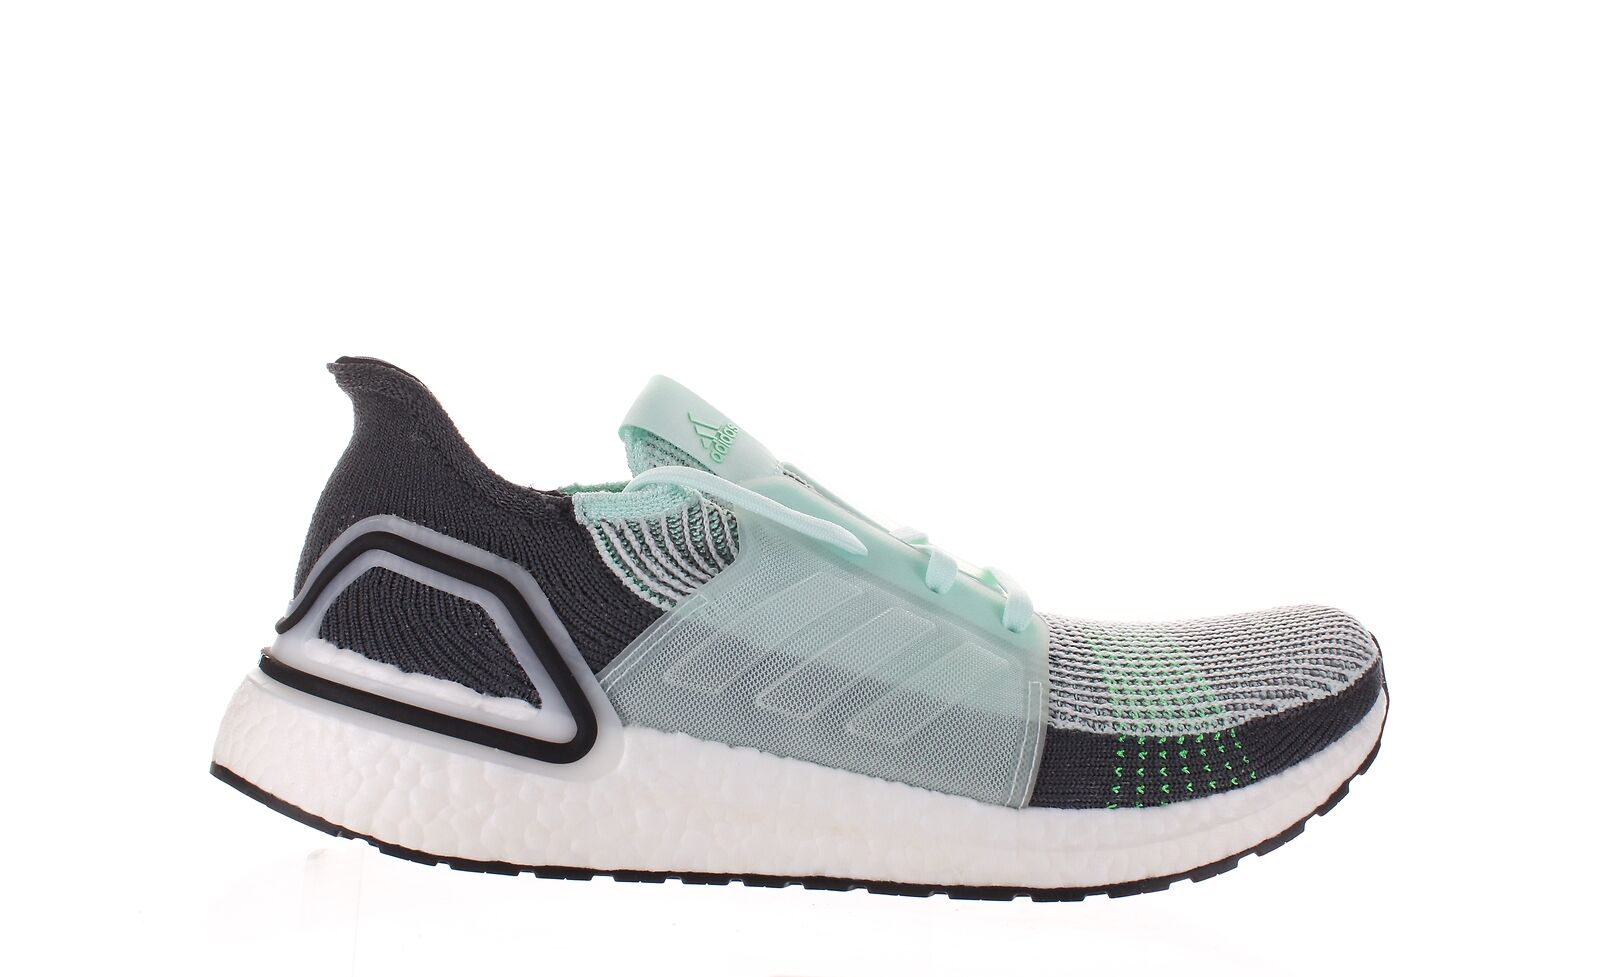 Adidas Mens Ultraboost 19 Ice Mint/Ice Mint/Grey Running Shoes Size 12 (2277834)